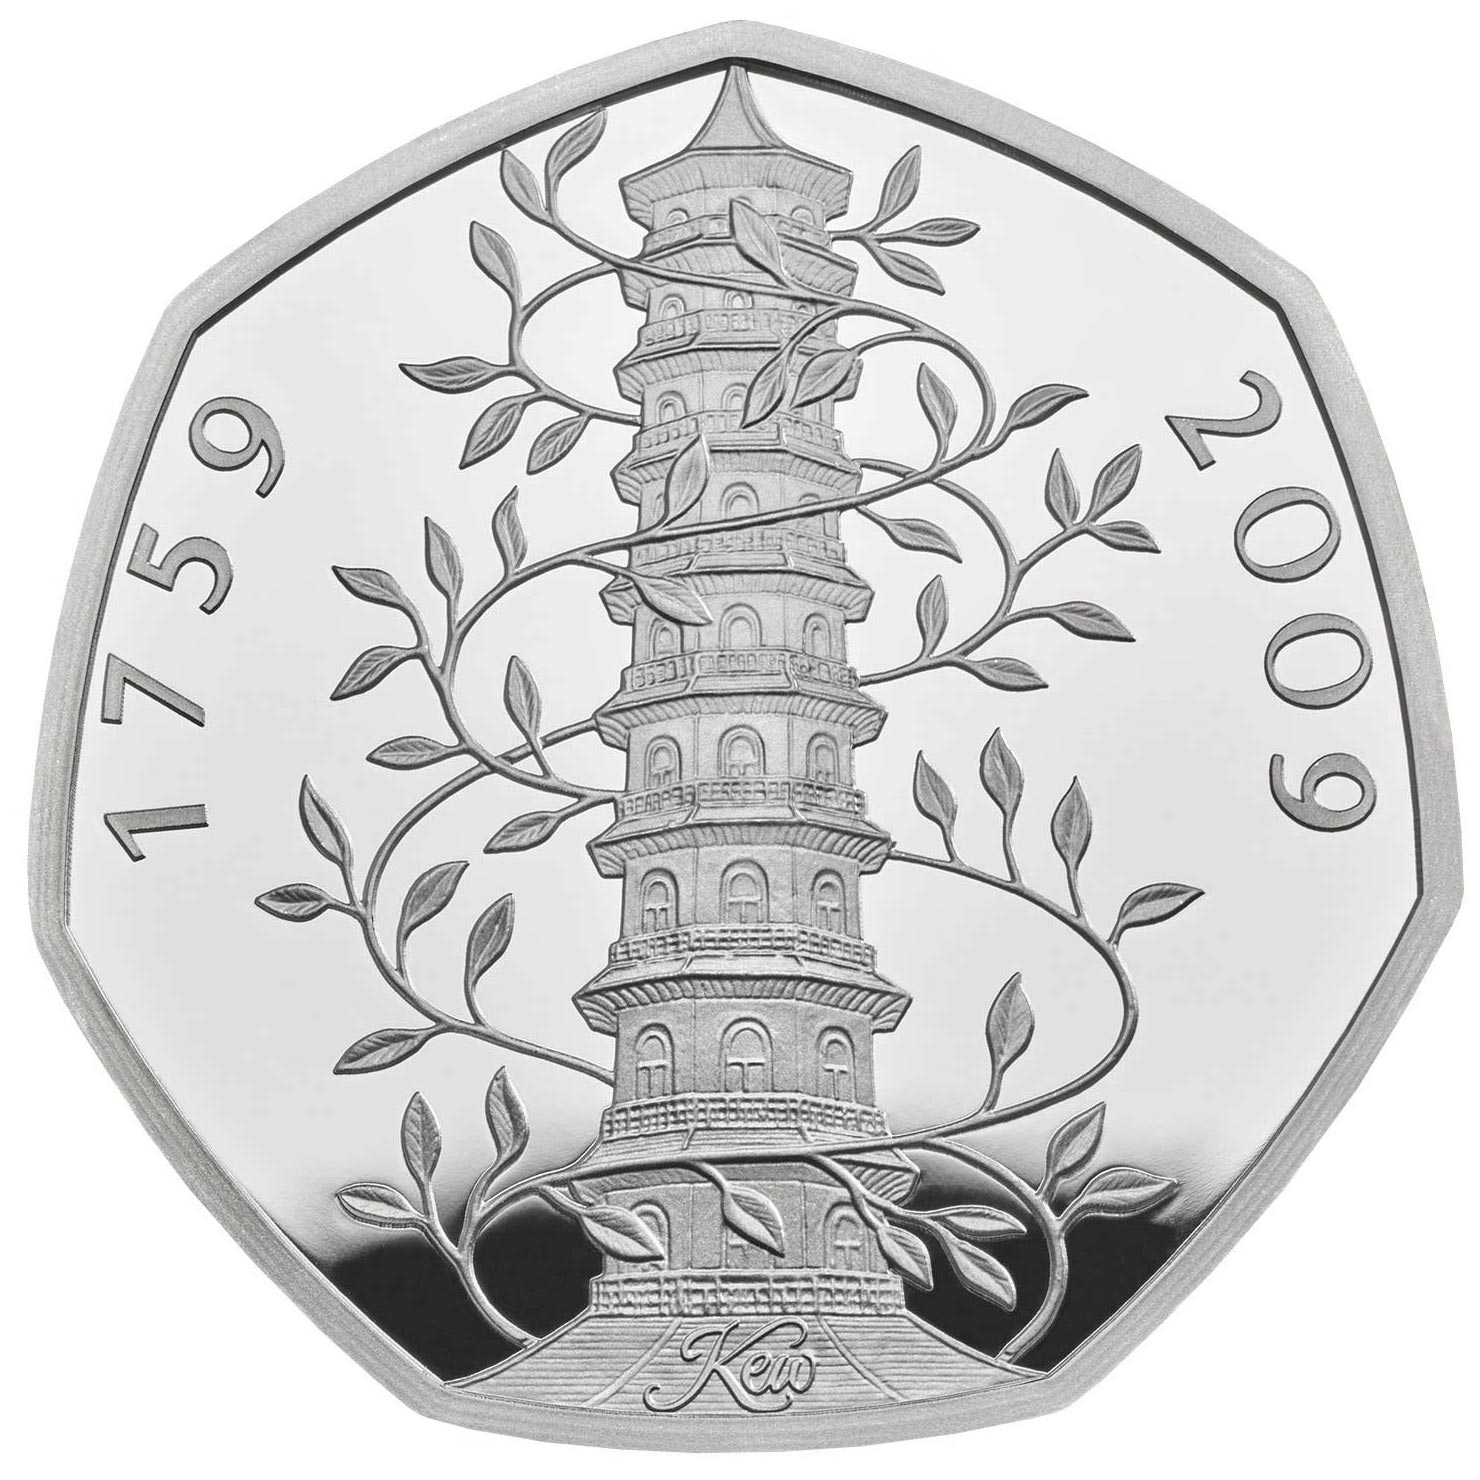 Image of 50 pence coin - 250th anniversary of the foundation of the Royal Botanic Gardens at Kew | United Kingdom 2009.  The Copper–Nickel (CuNi) coin is of UNC quality.